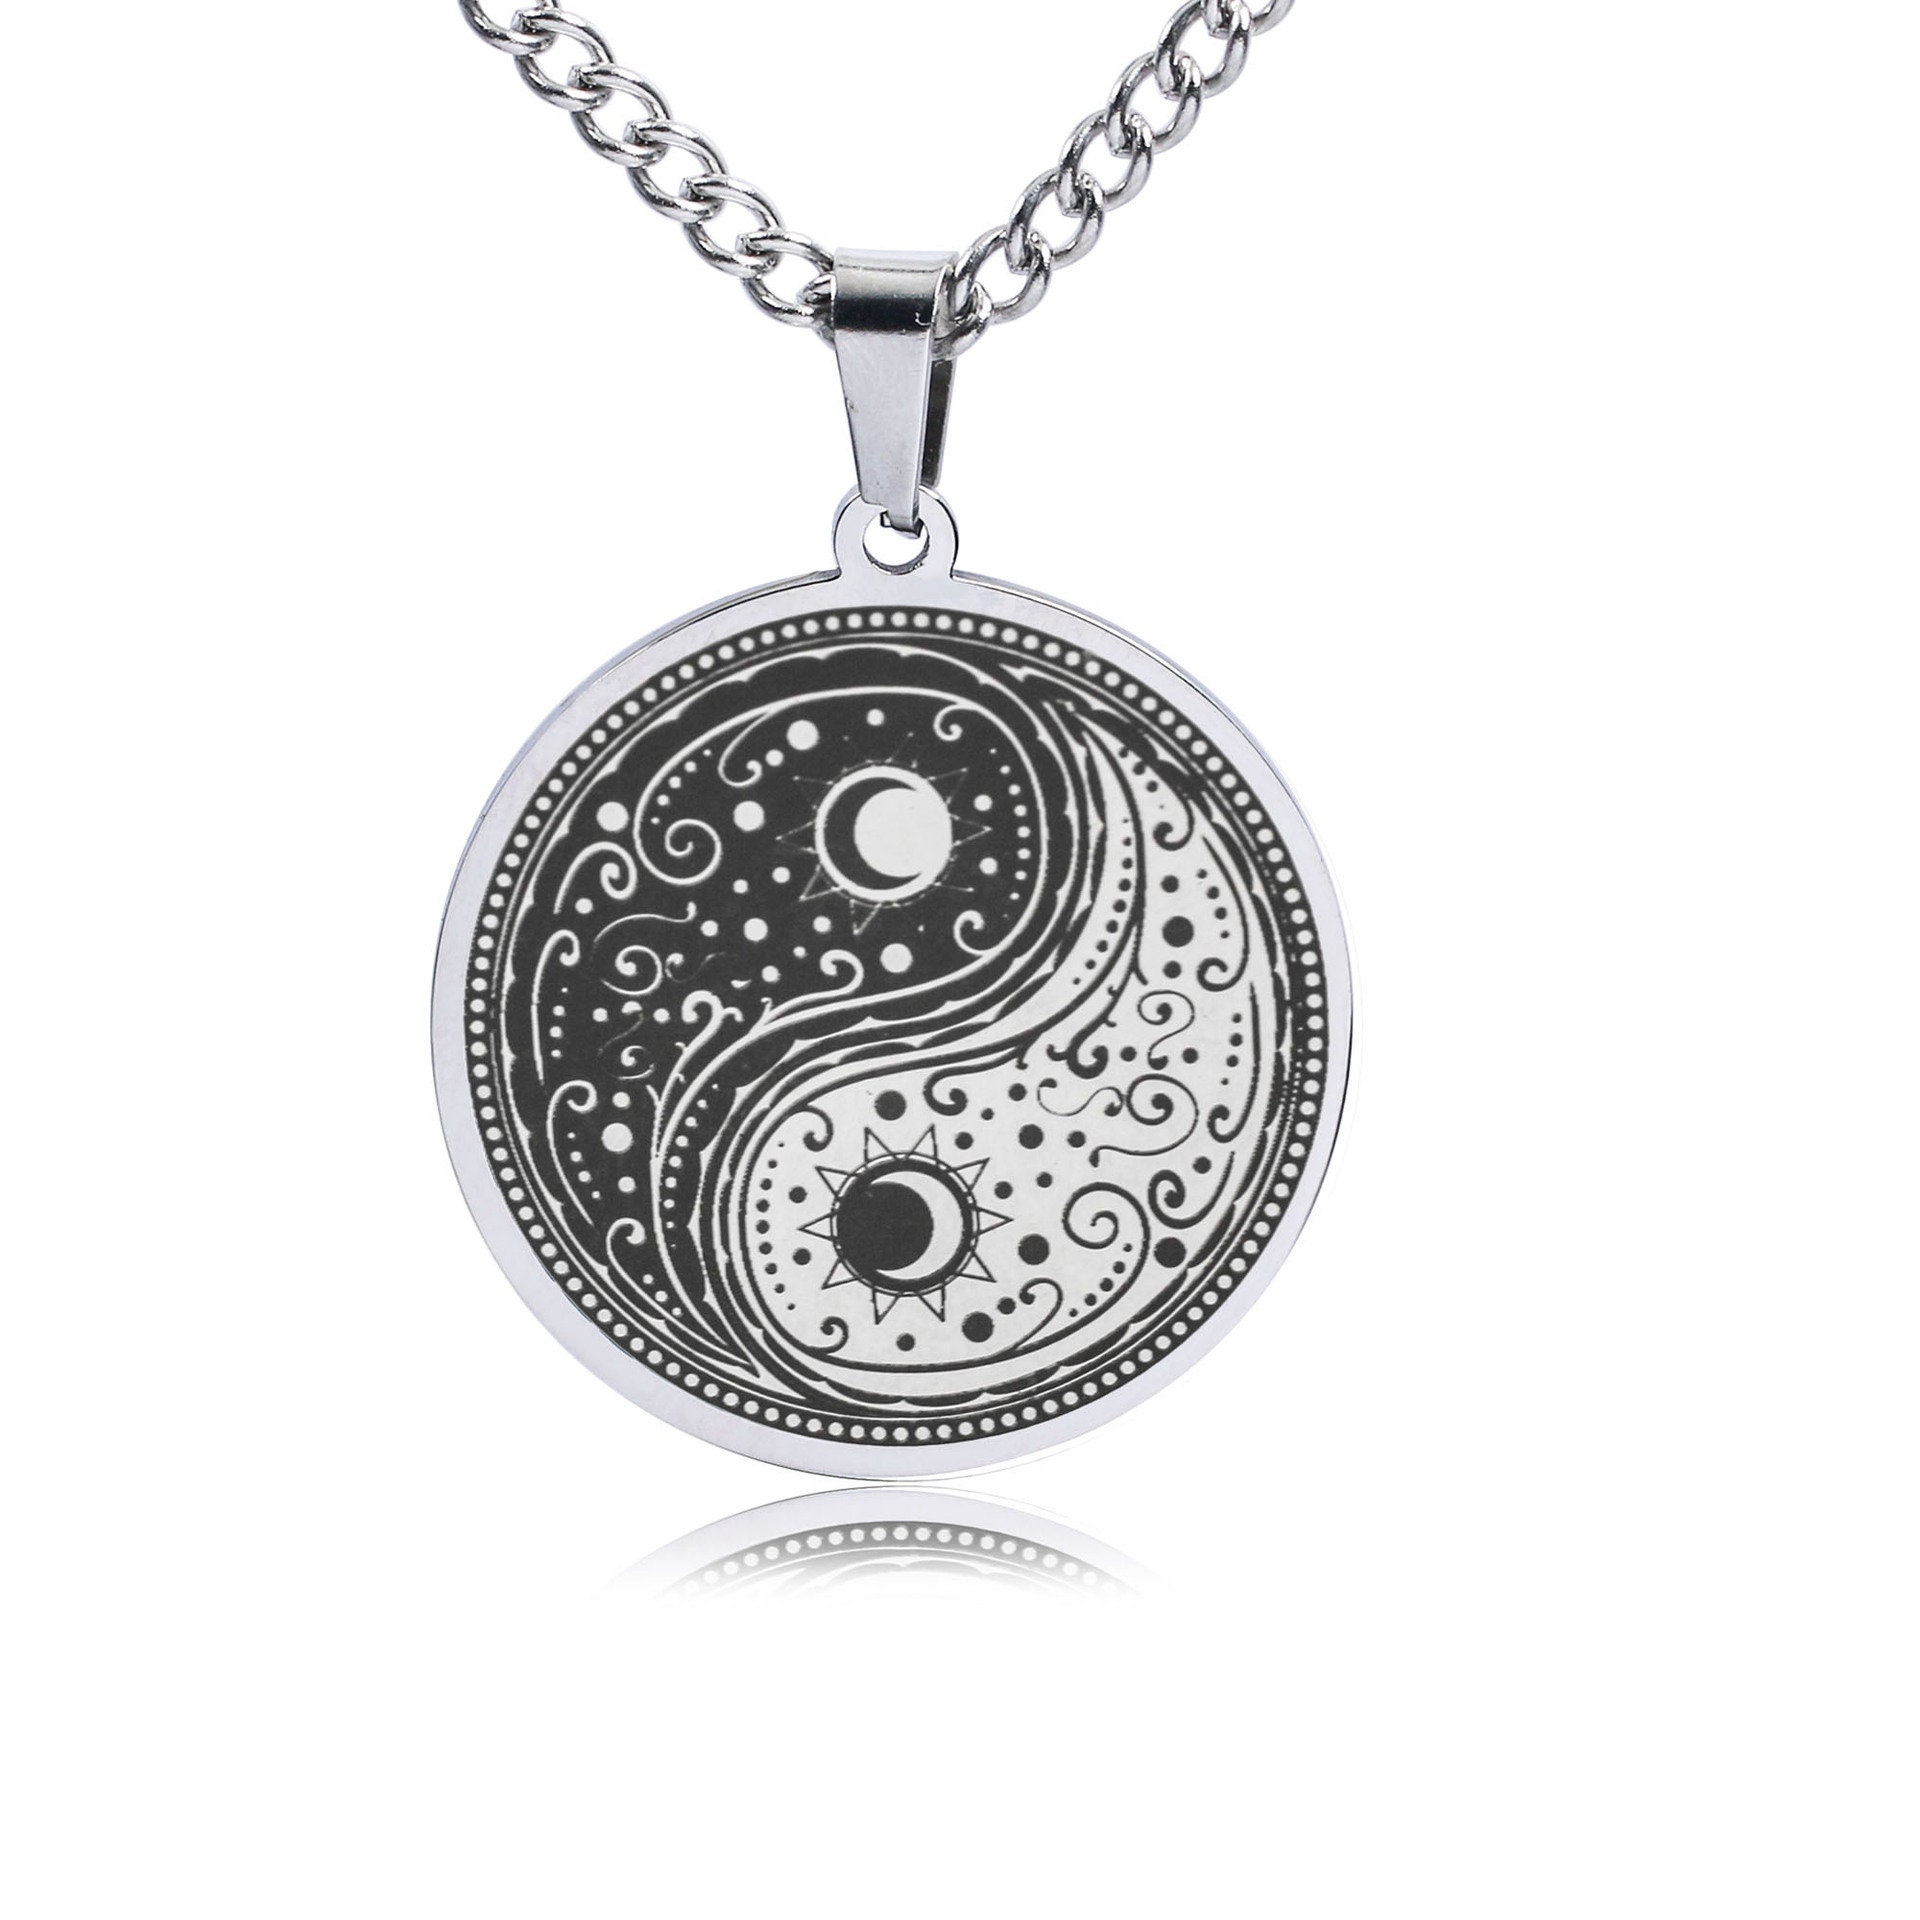 Yin & Yang Tai Chi Stainless Steel Pendant With Chain Necklace - Etsy